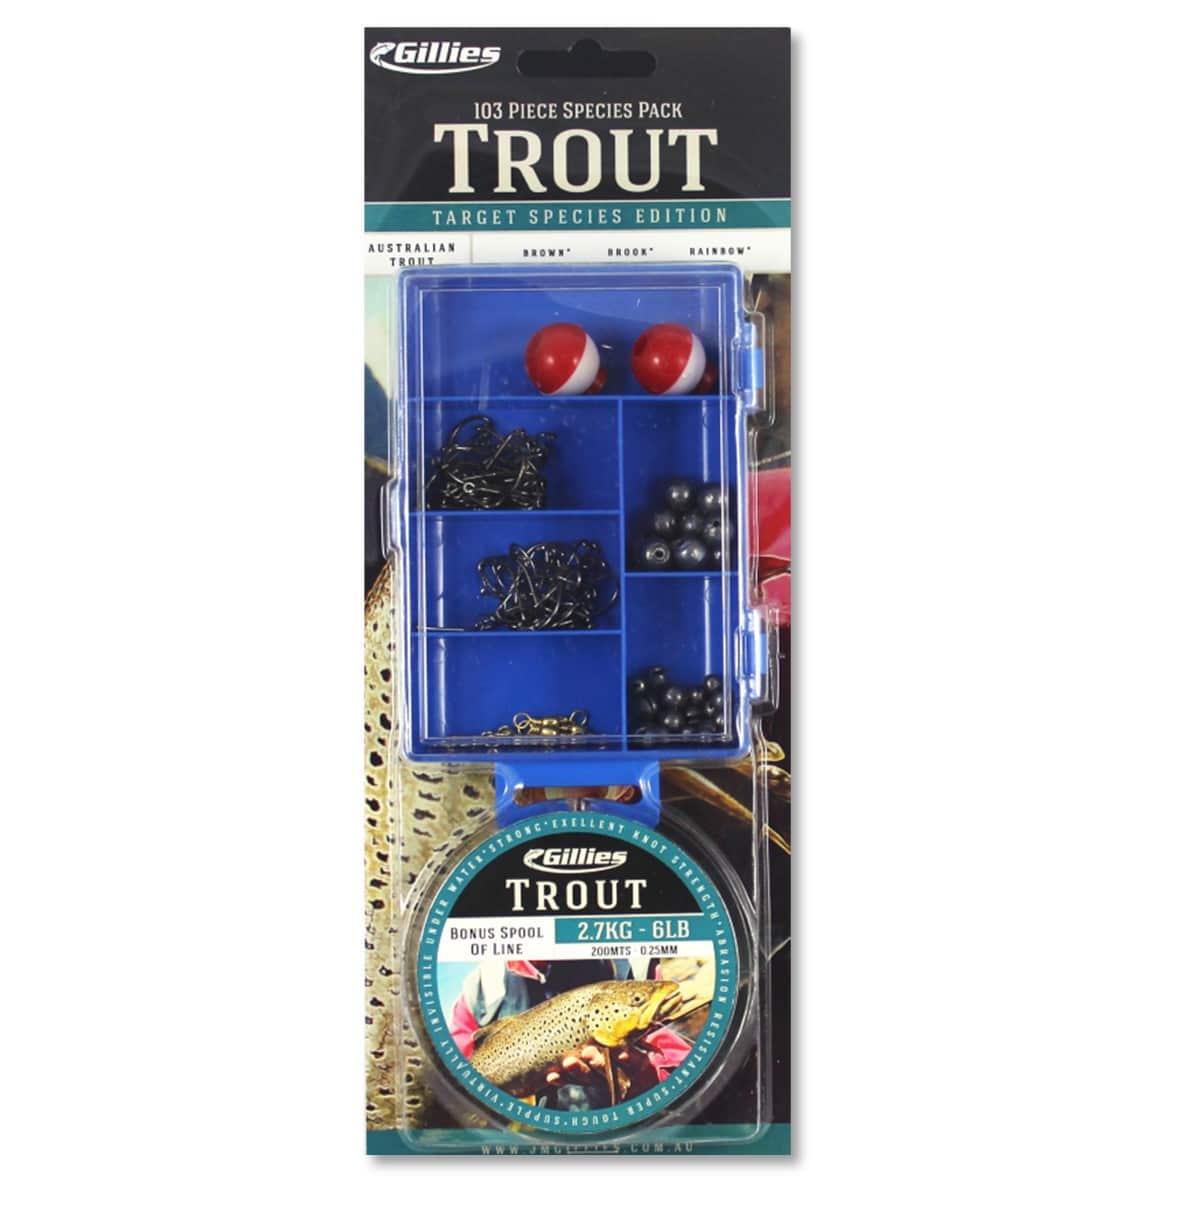 Gillies 103 Piece Trout Species Pack -  - Mansfield Hunting & Fishing - Products to prepare for Corona Virus